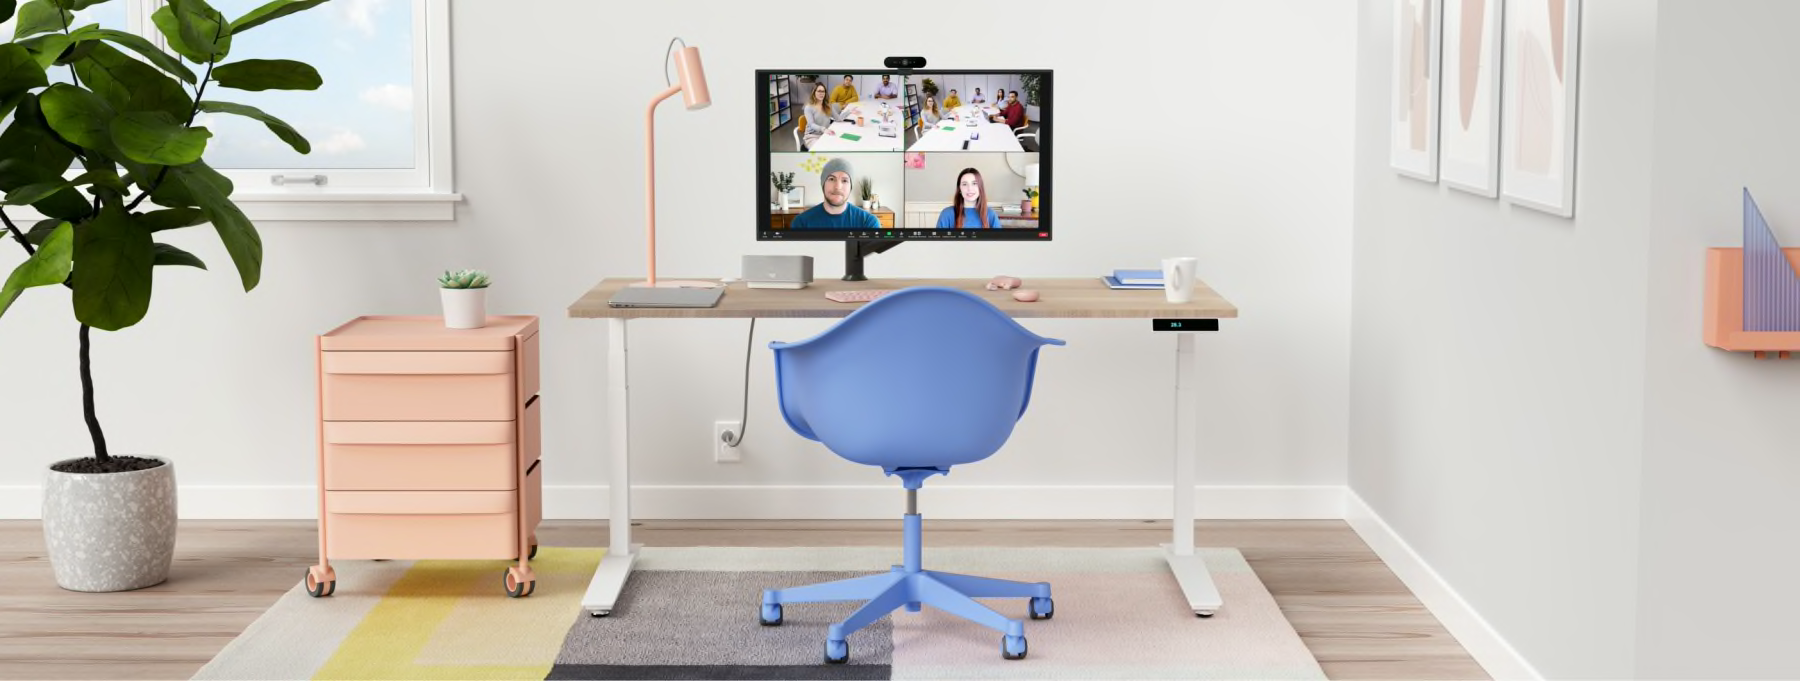 Zoom Solutions for home office